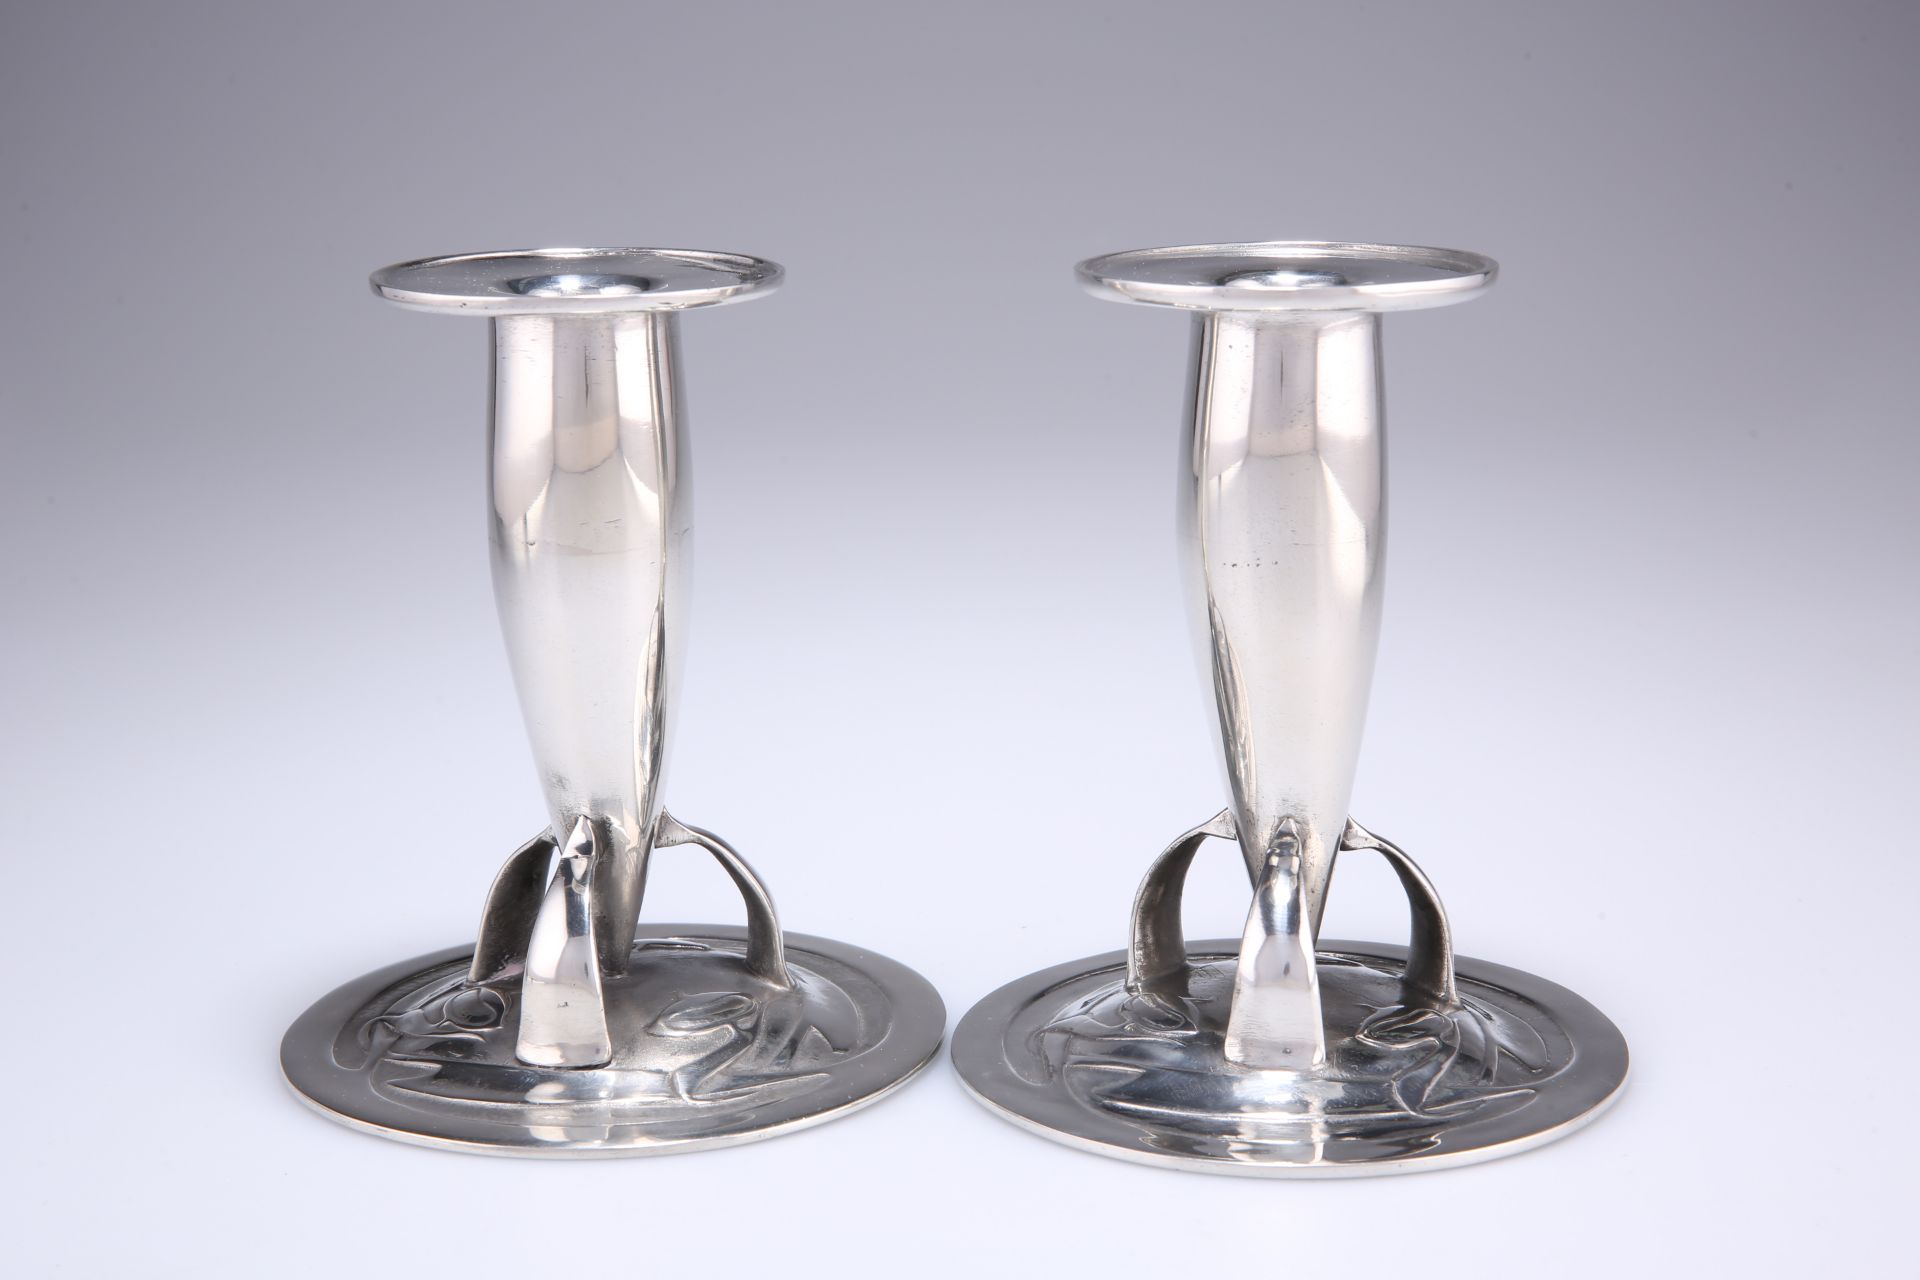 ARCHIBALD KNOX FOR LIBERTY & CO A PAIR OF PEWTER CANDLESTICKS, nos. 0221, each torpedo-shaped stem